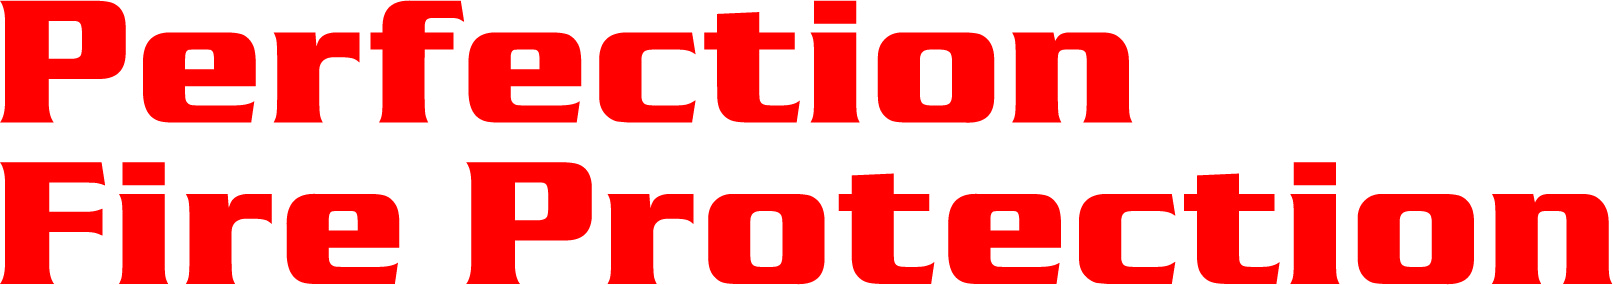 Perfection Fire Protection Logo